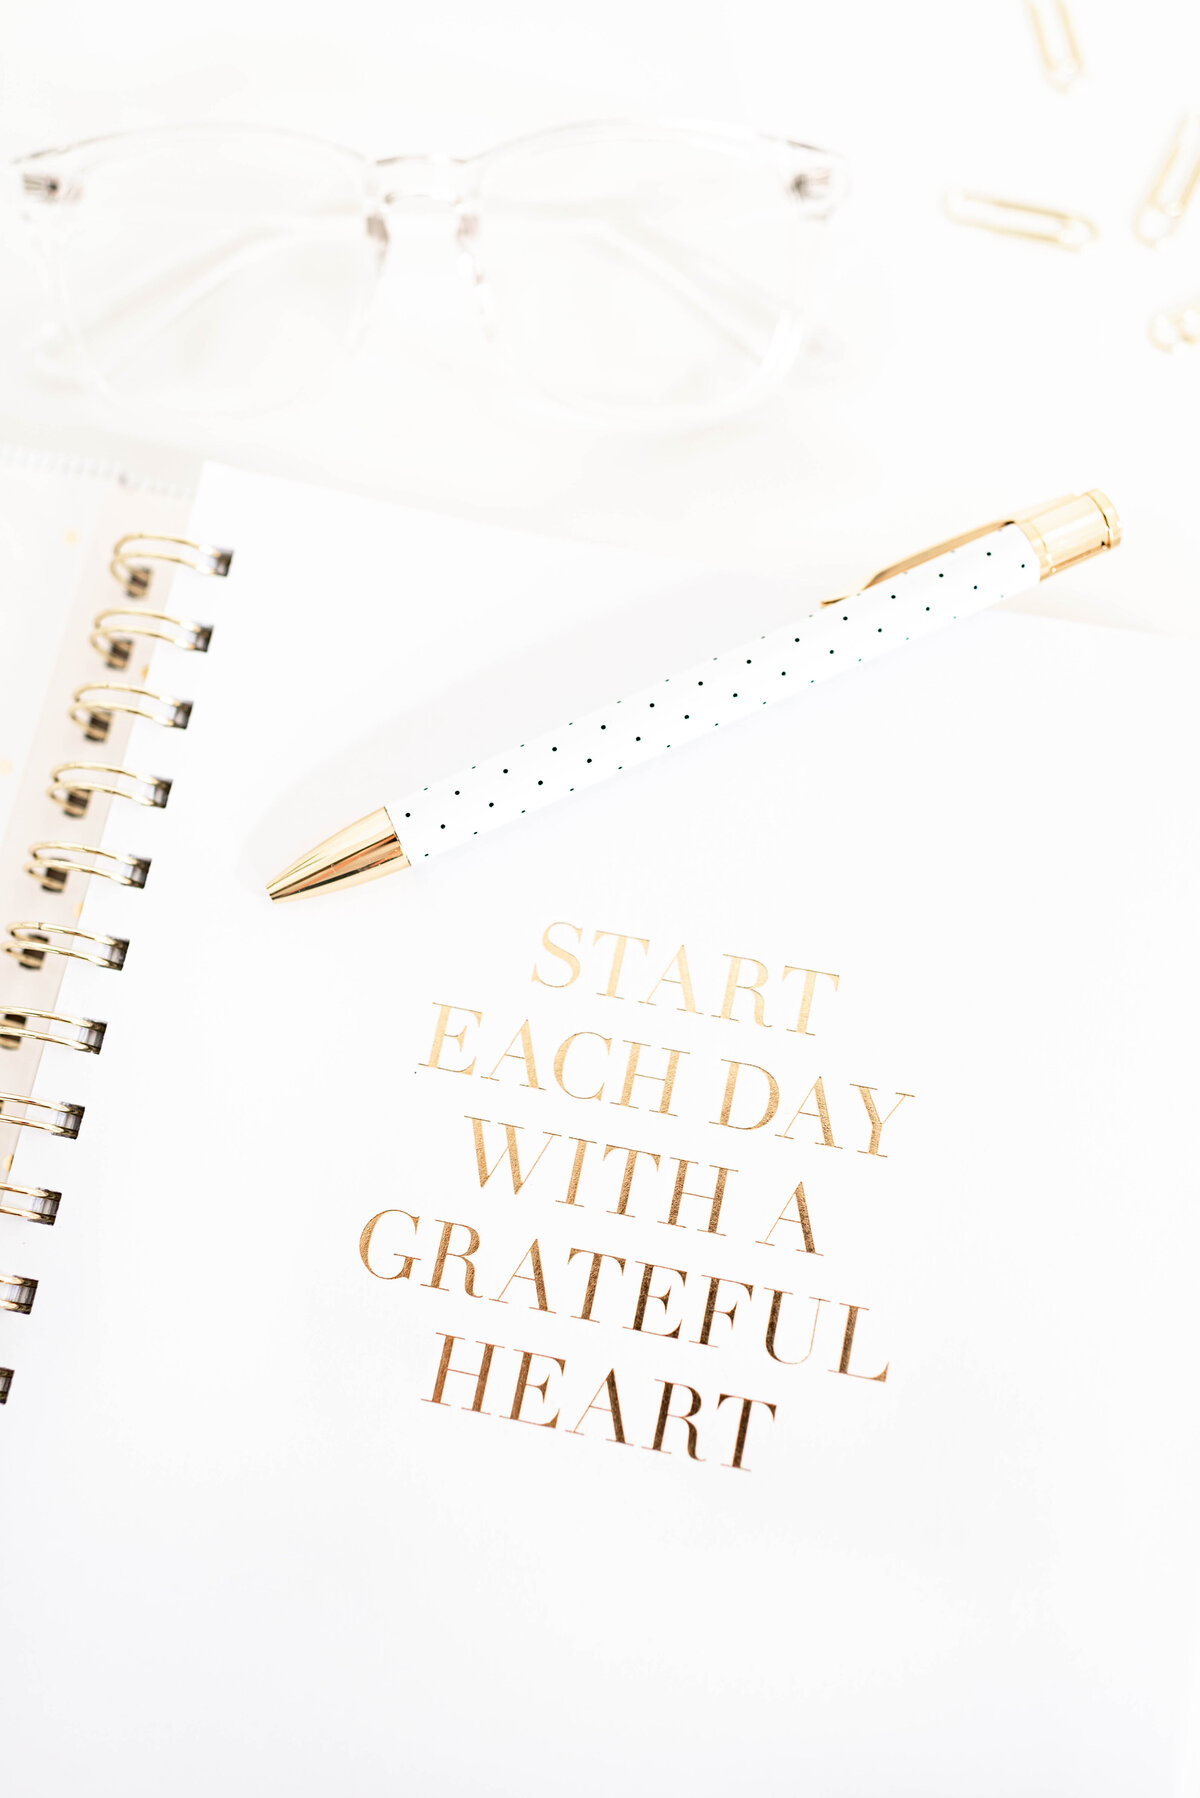 journal that says start everyday with a grateful heart